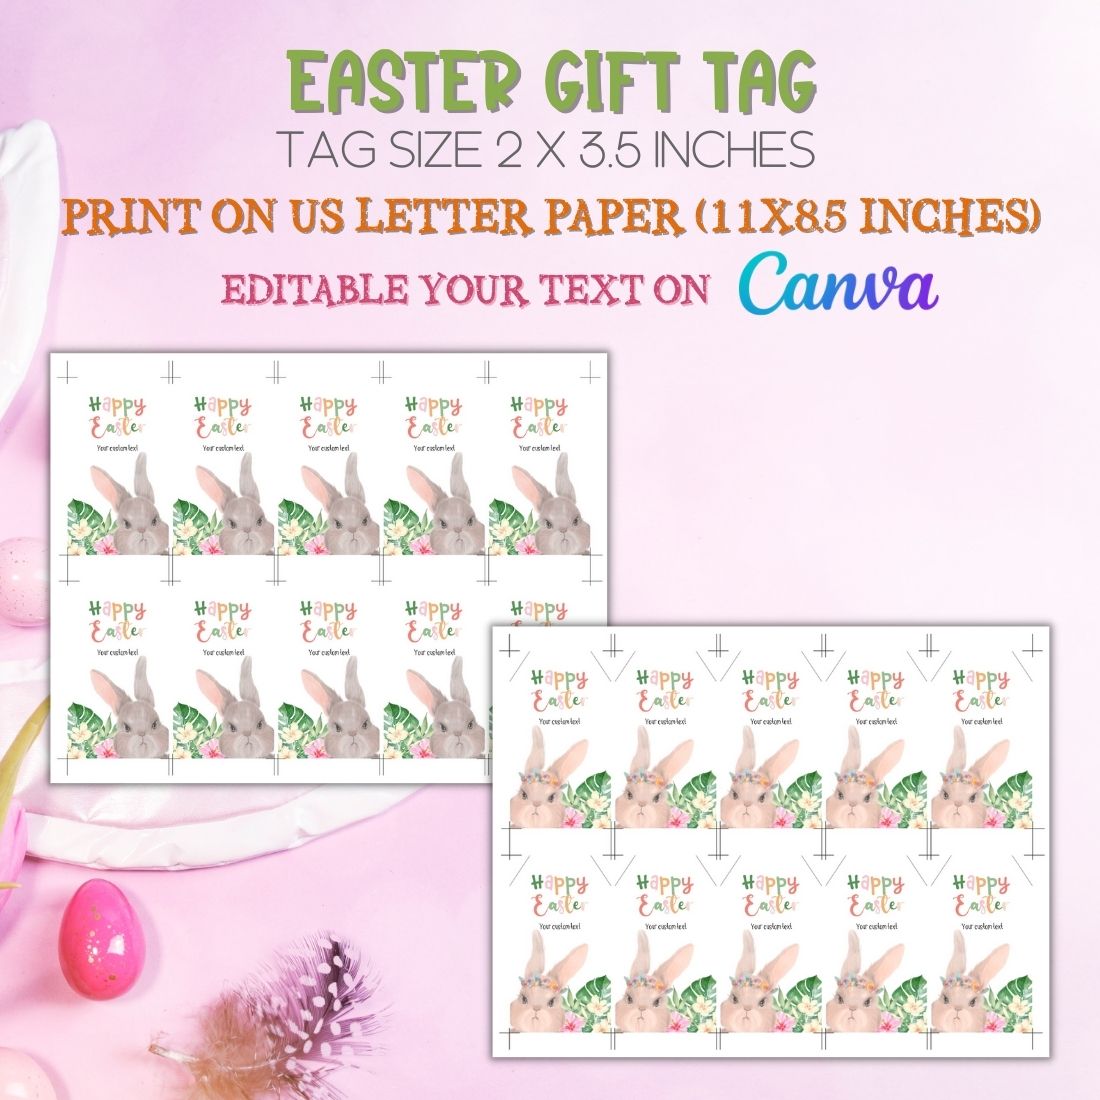 Editable gift tag, Easter Basket Gift Tag, Easter Treat Tag preview image.